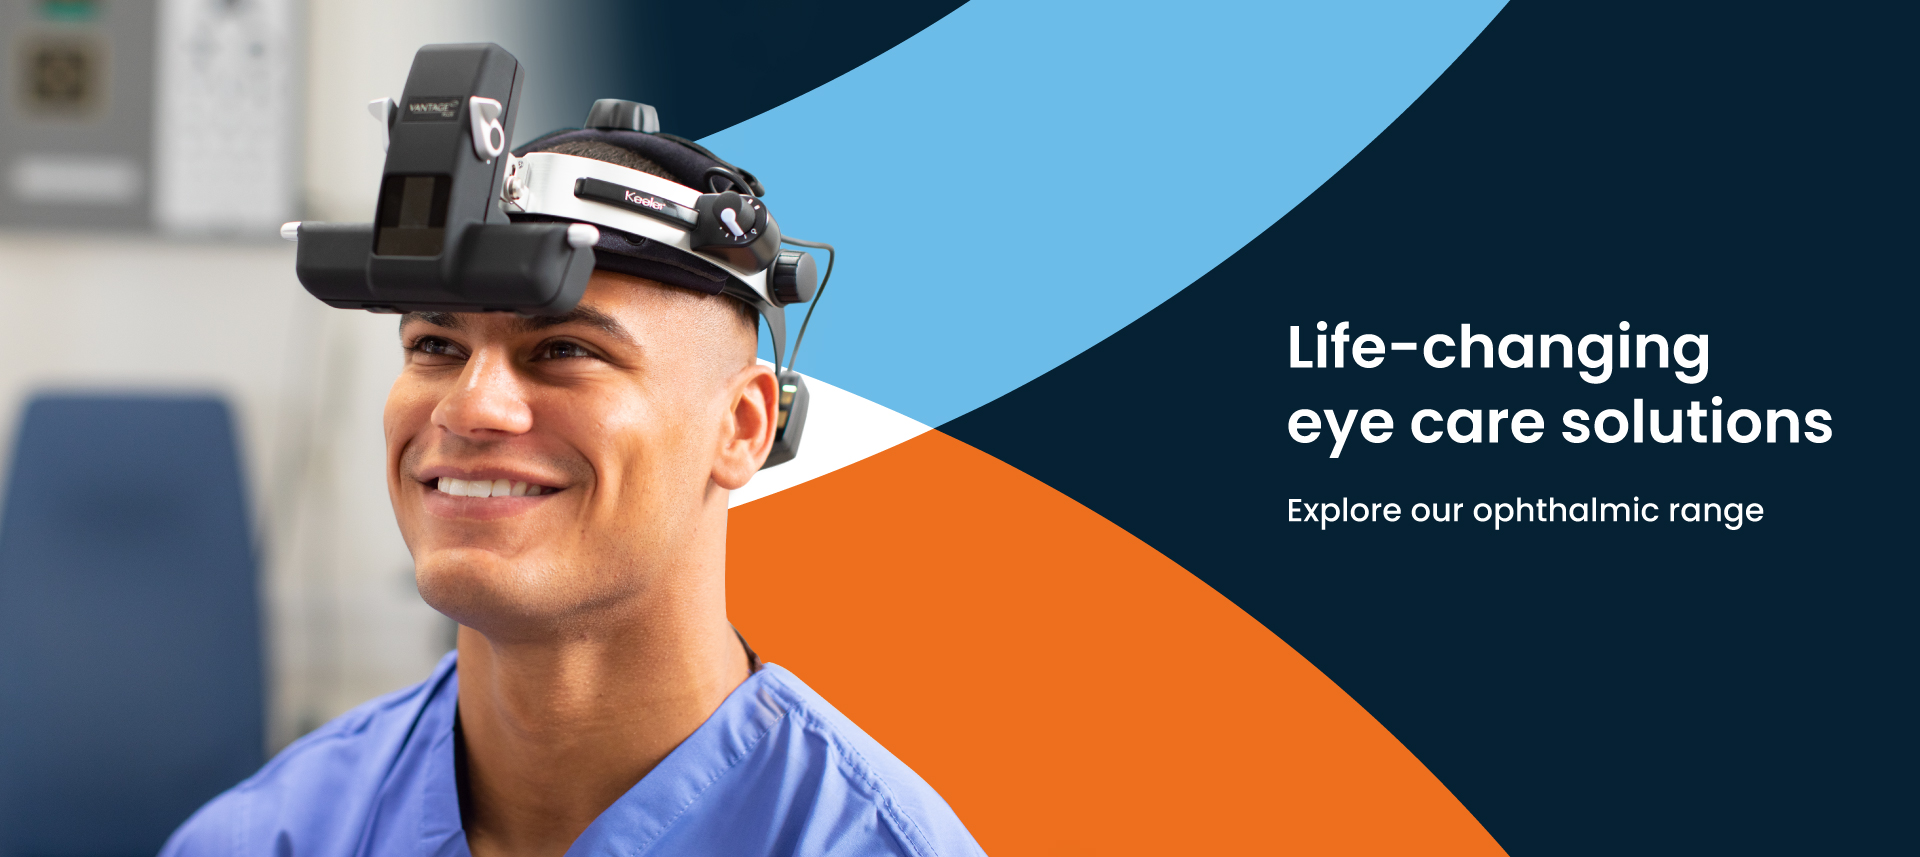 Keeler life-changing eye care solutions